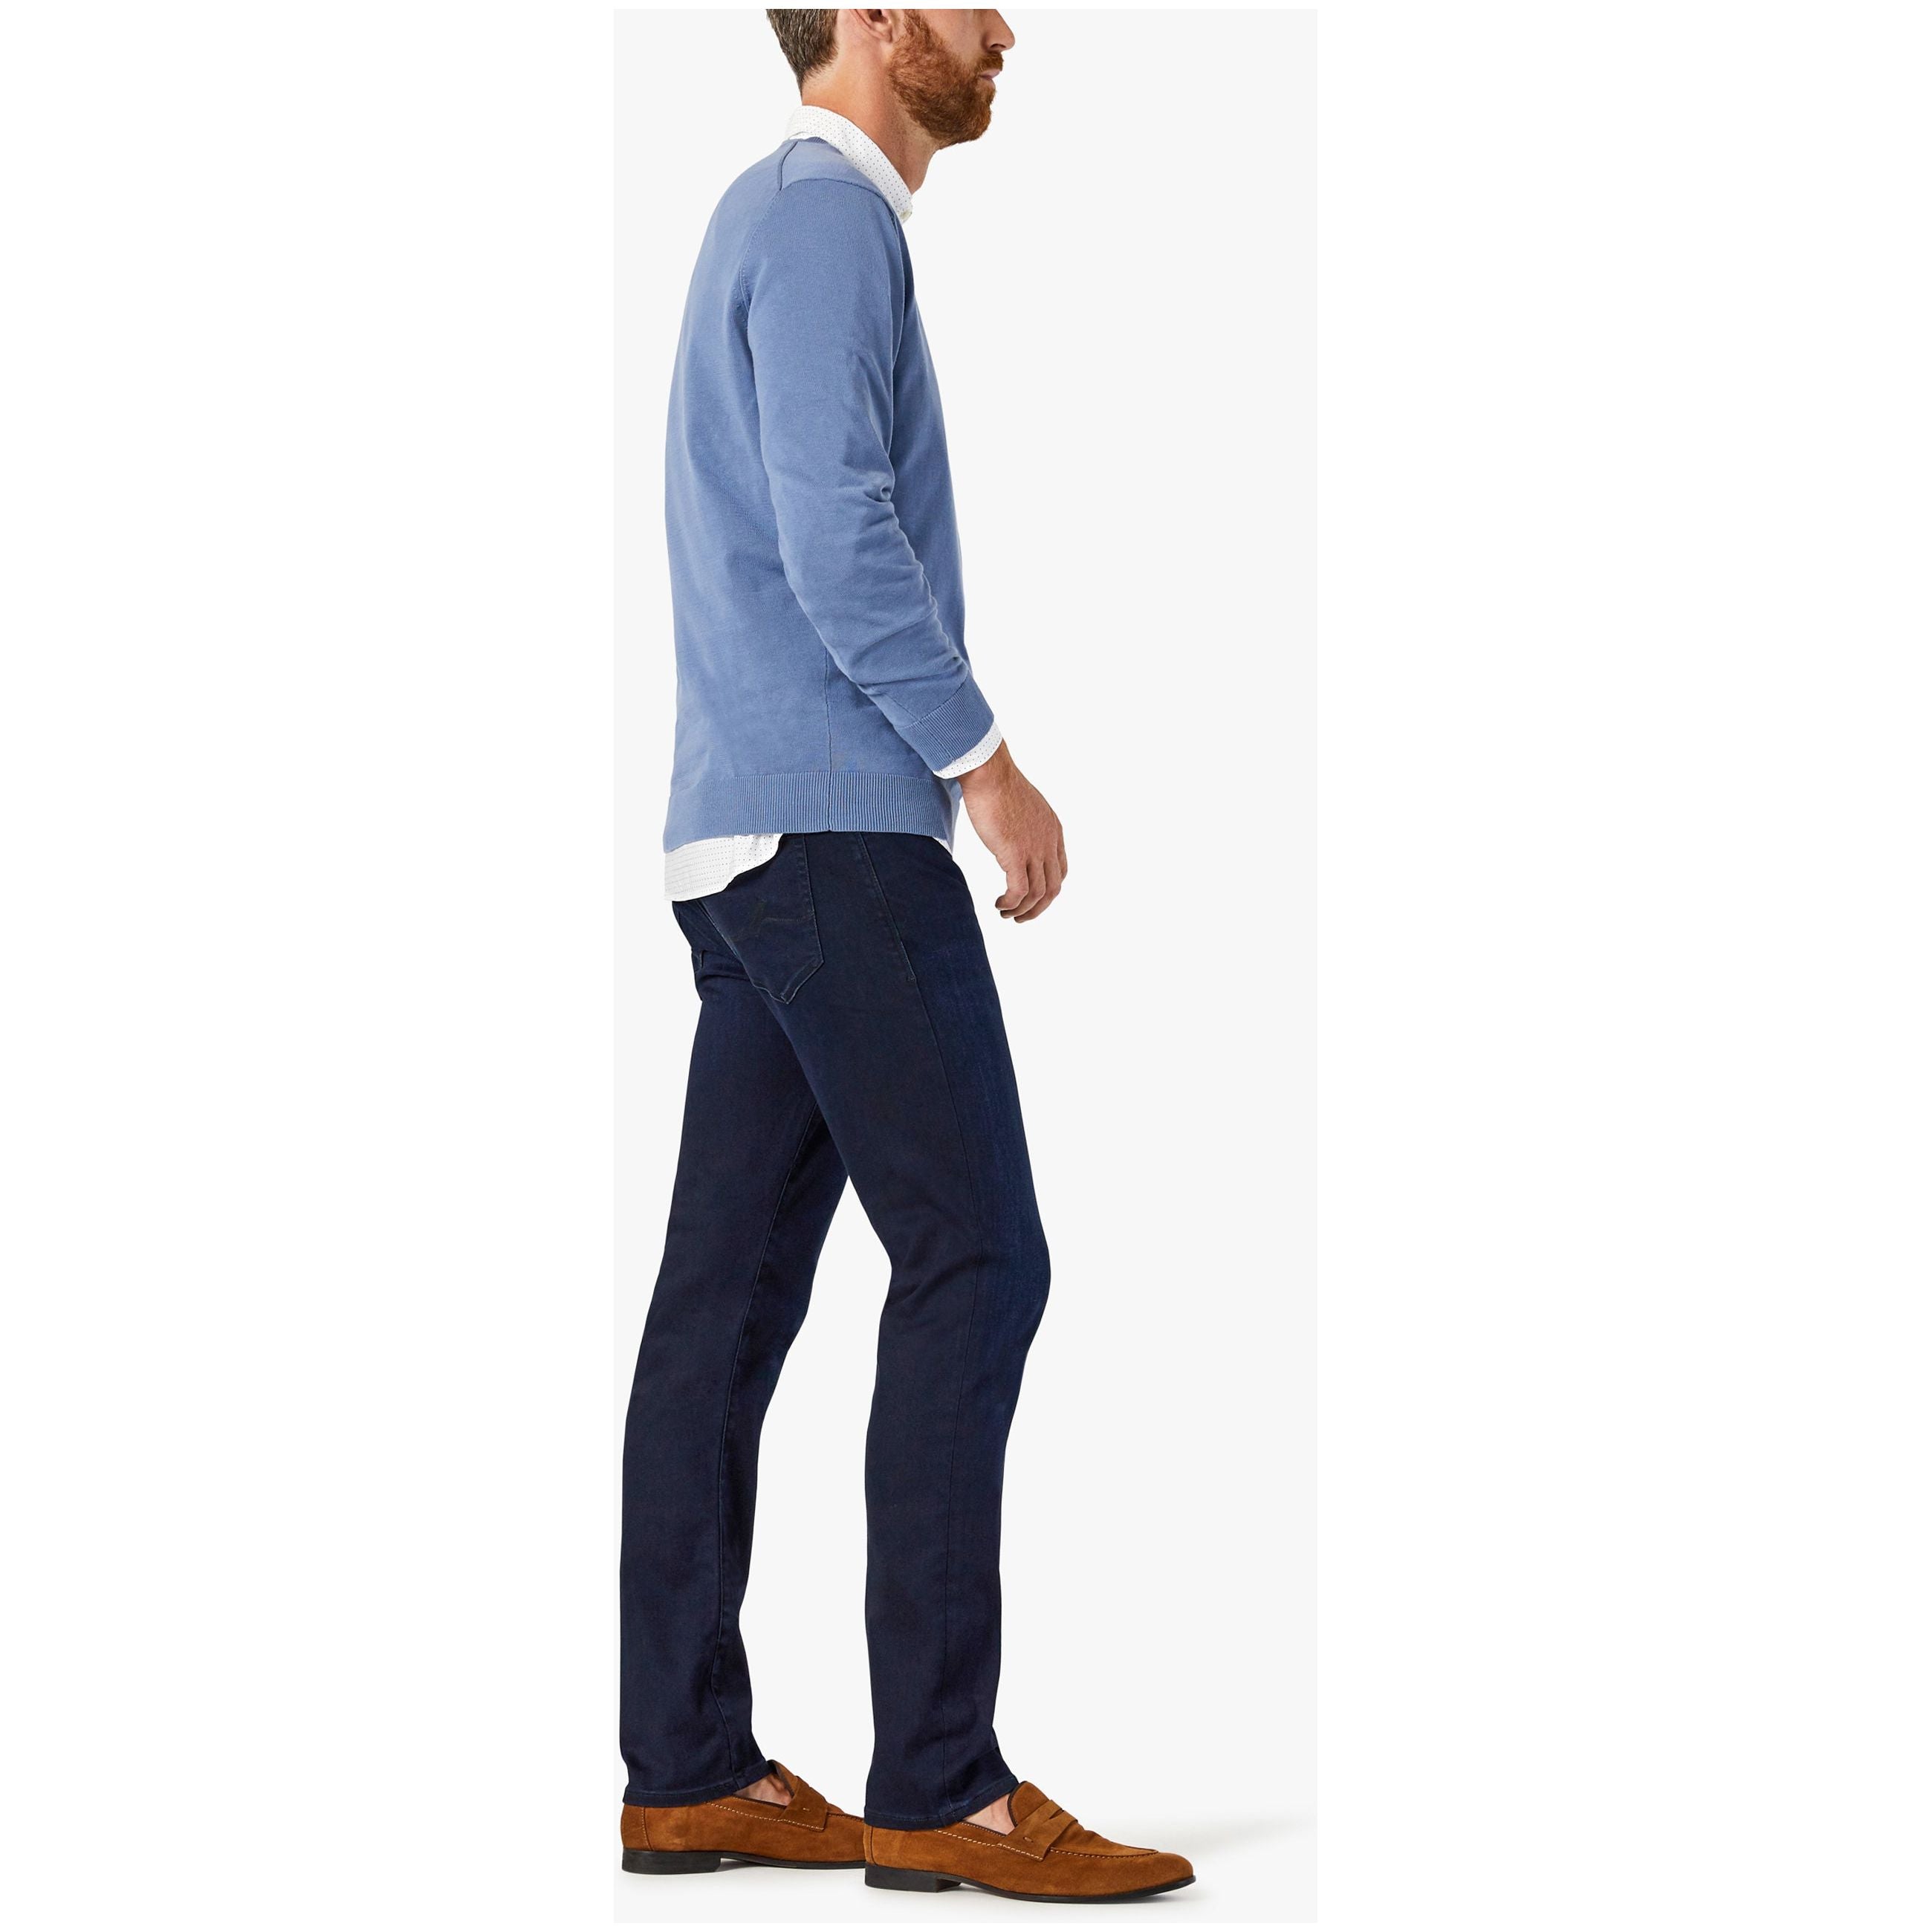 34 Heritage - Courage Straight Leg Jeans in Ink Urban